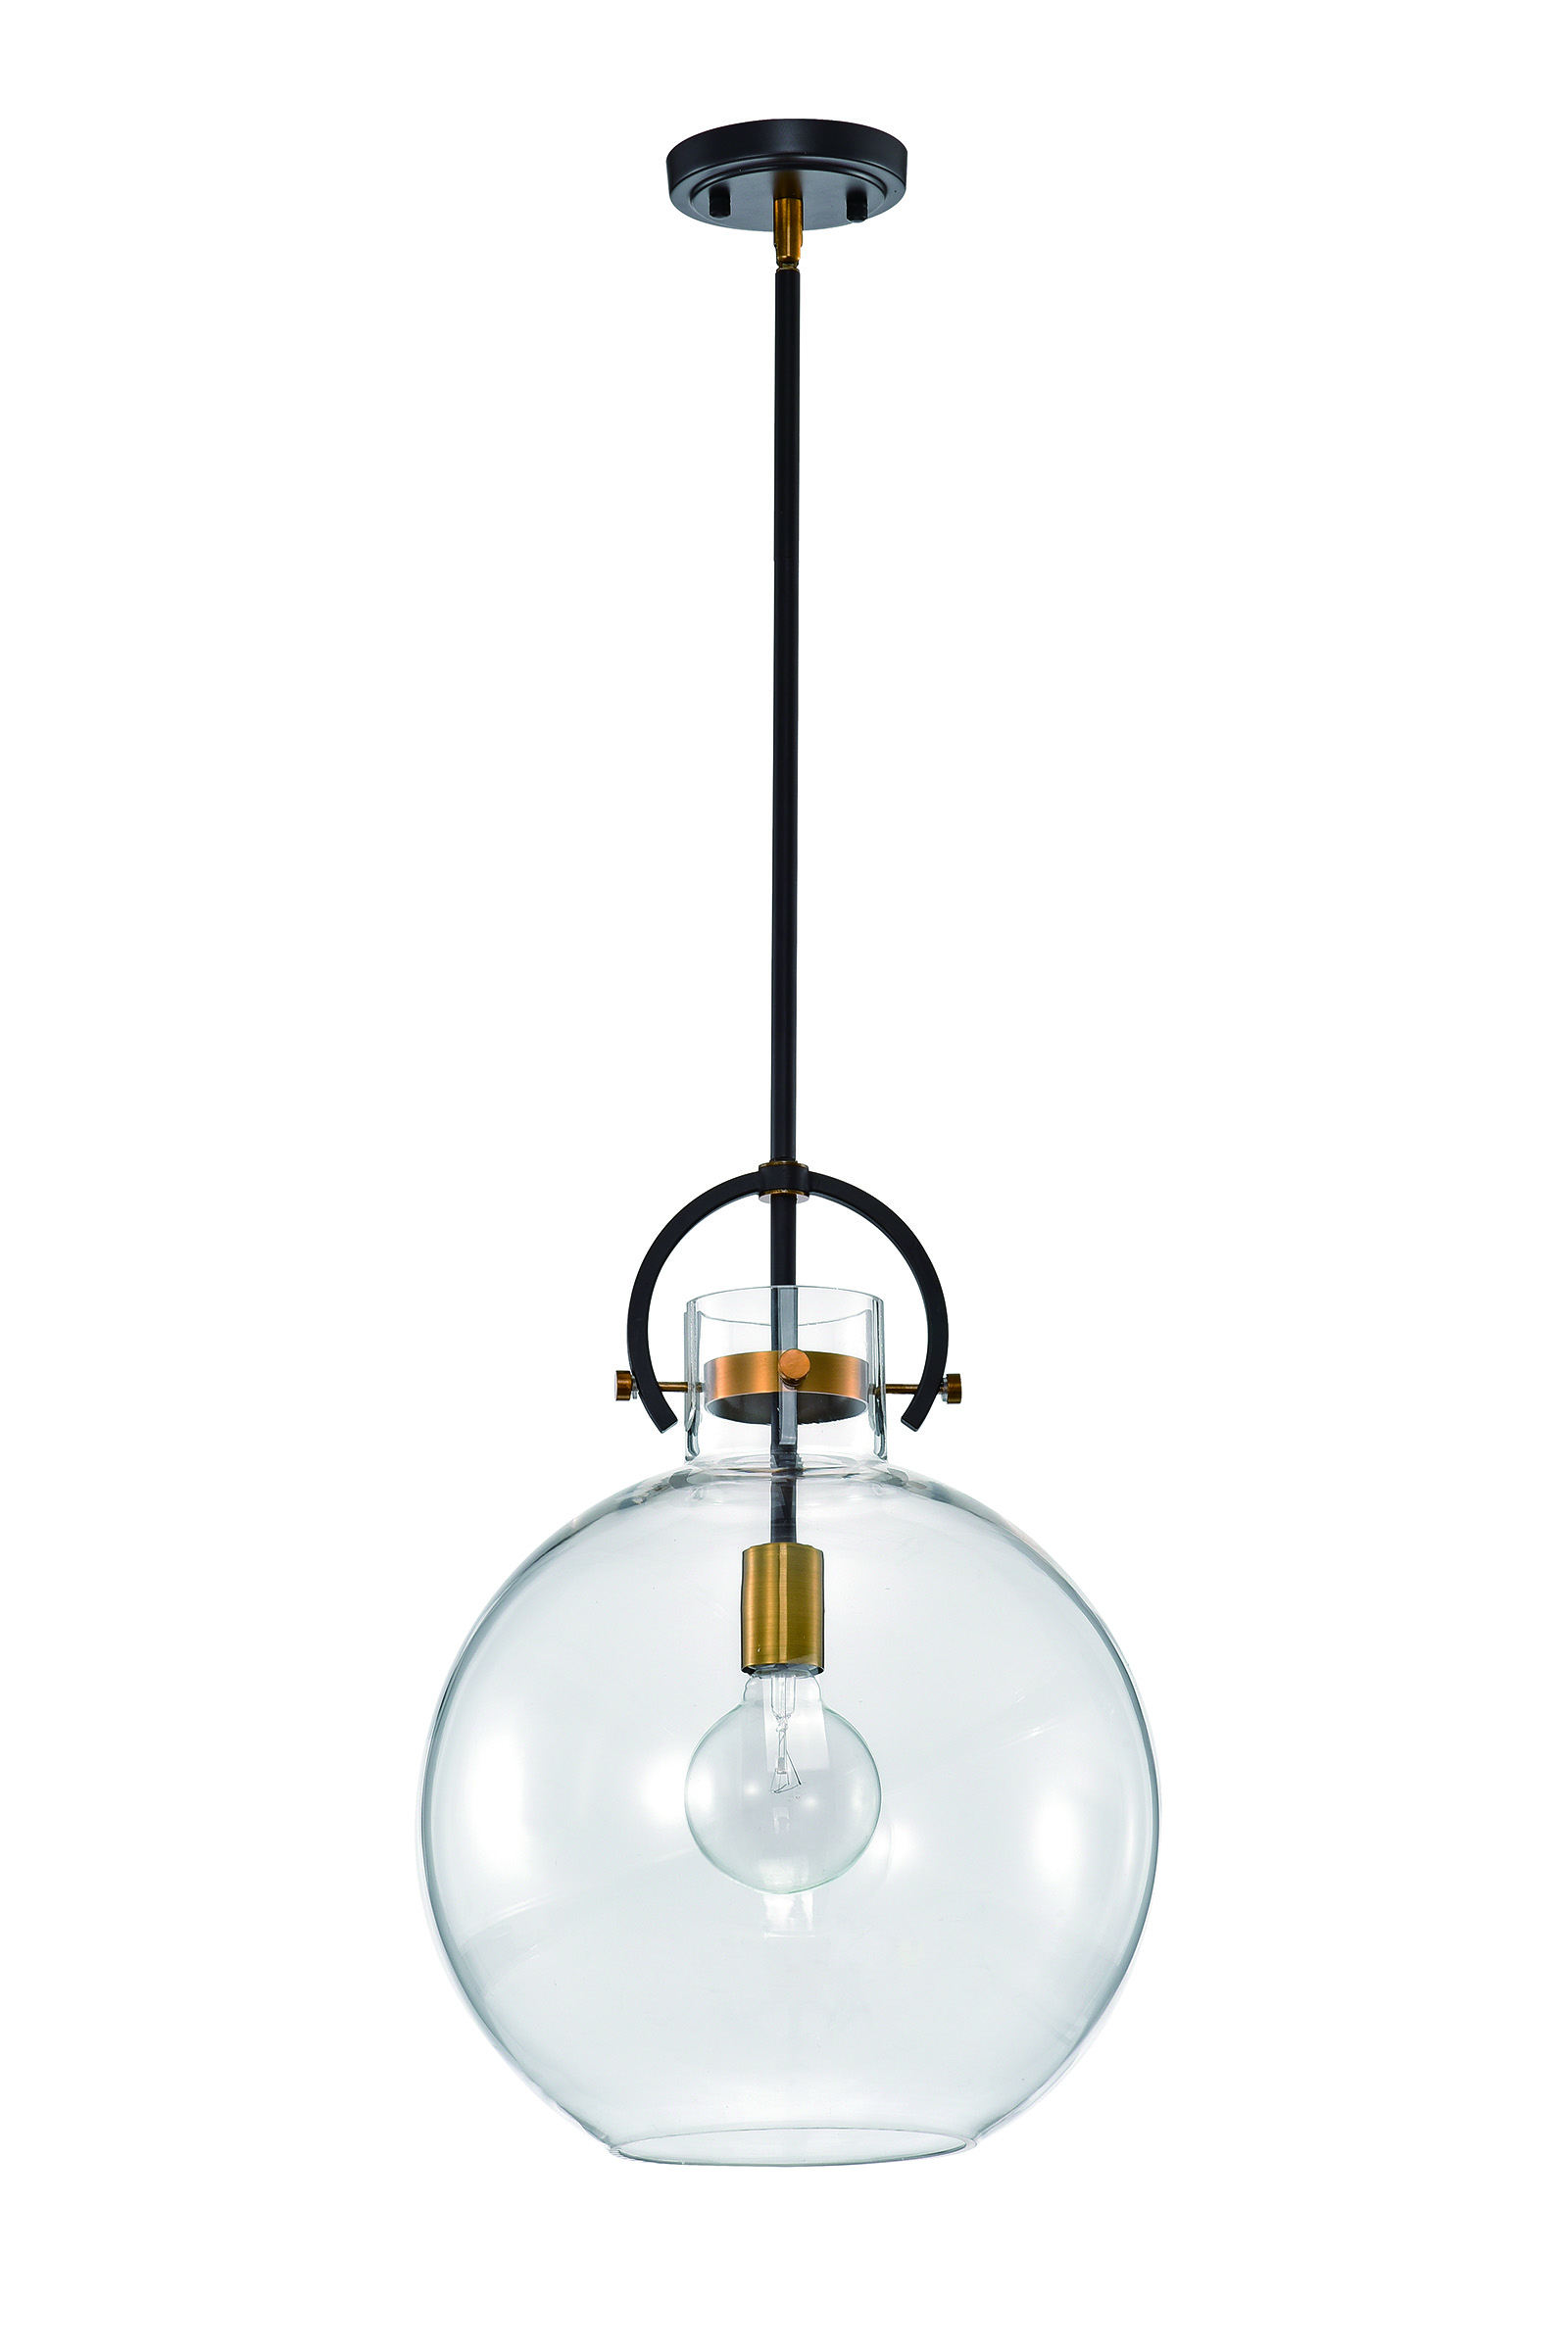 1 Light Oil Rubbed Bronze And Antique Gold Pendant With Clear Glass Shade Edvivi Lighting